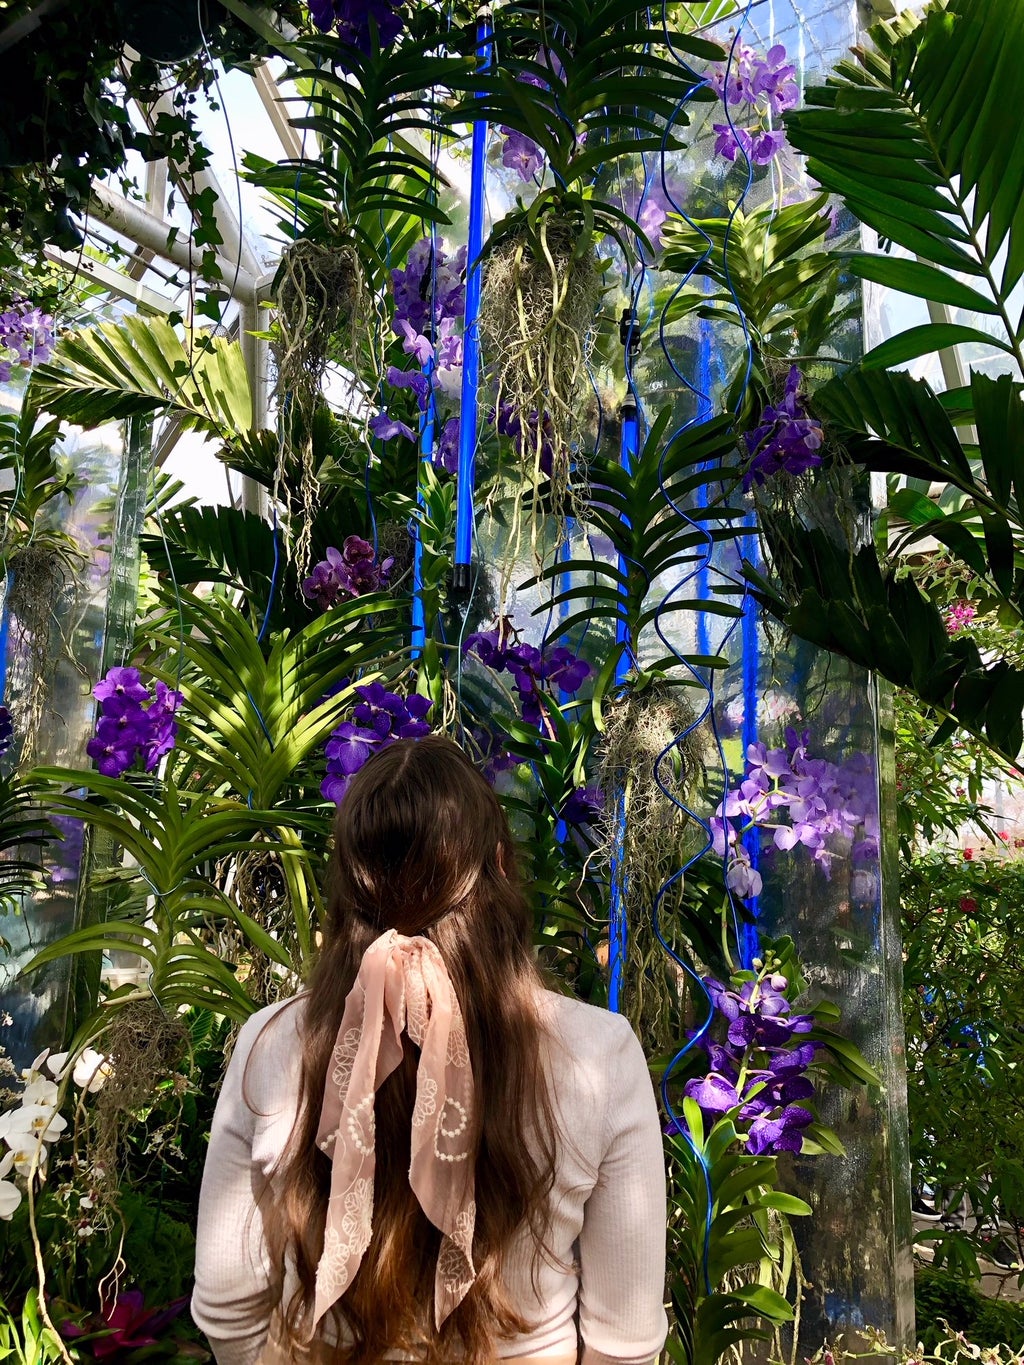 Girl with hair bow looking up at flowers